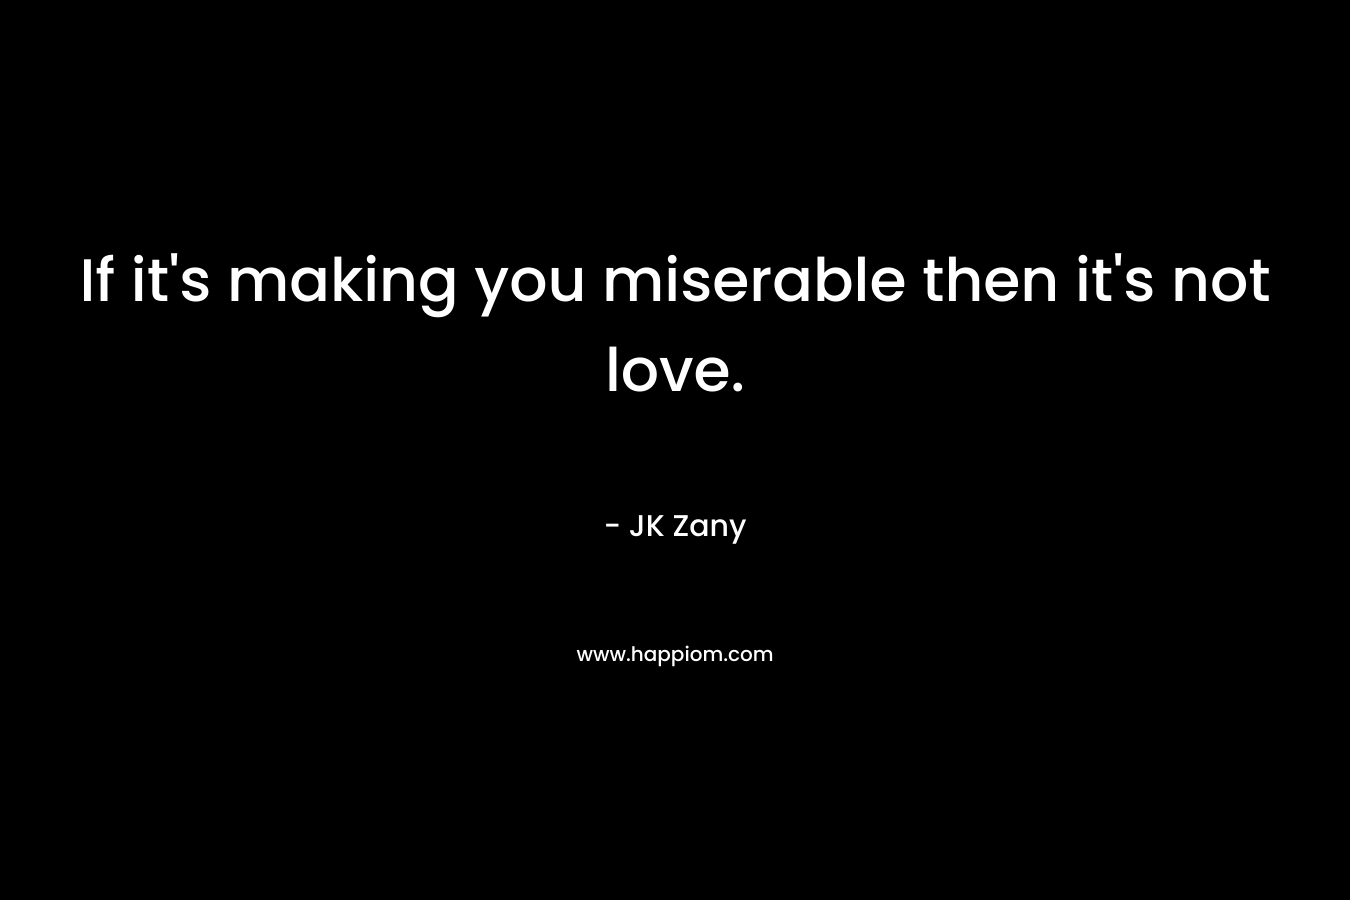 If it's making you miserable then it's not love.